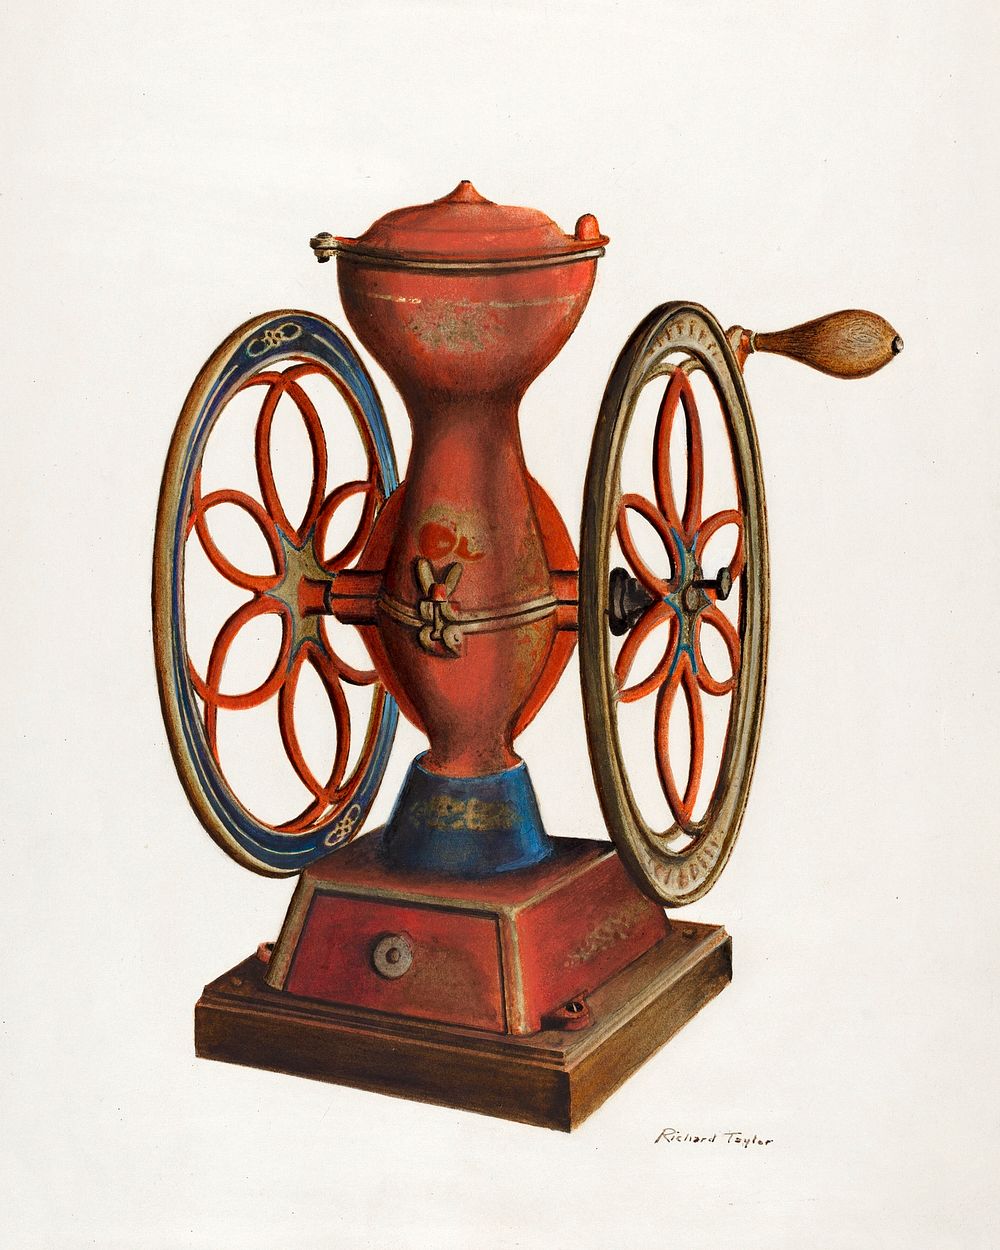 Coffee Grinder (ca. 1940) by Richard Taylor. Original from The National Gallery of Art. Digitally enhanced by rawpixel.